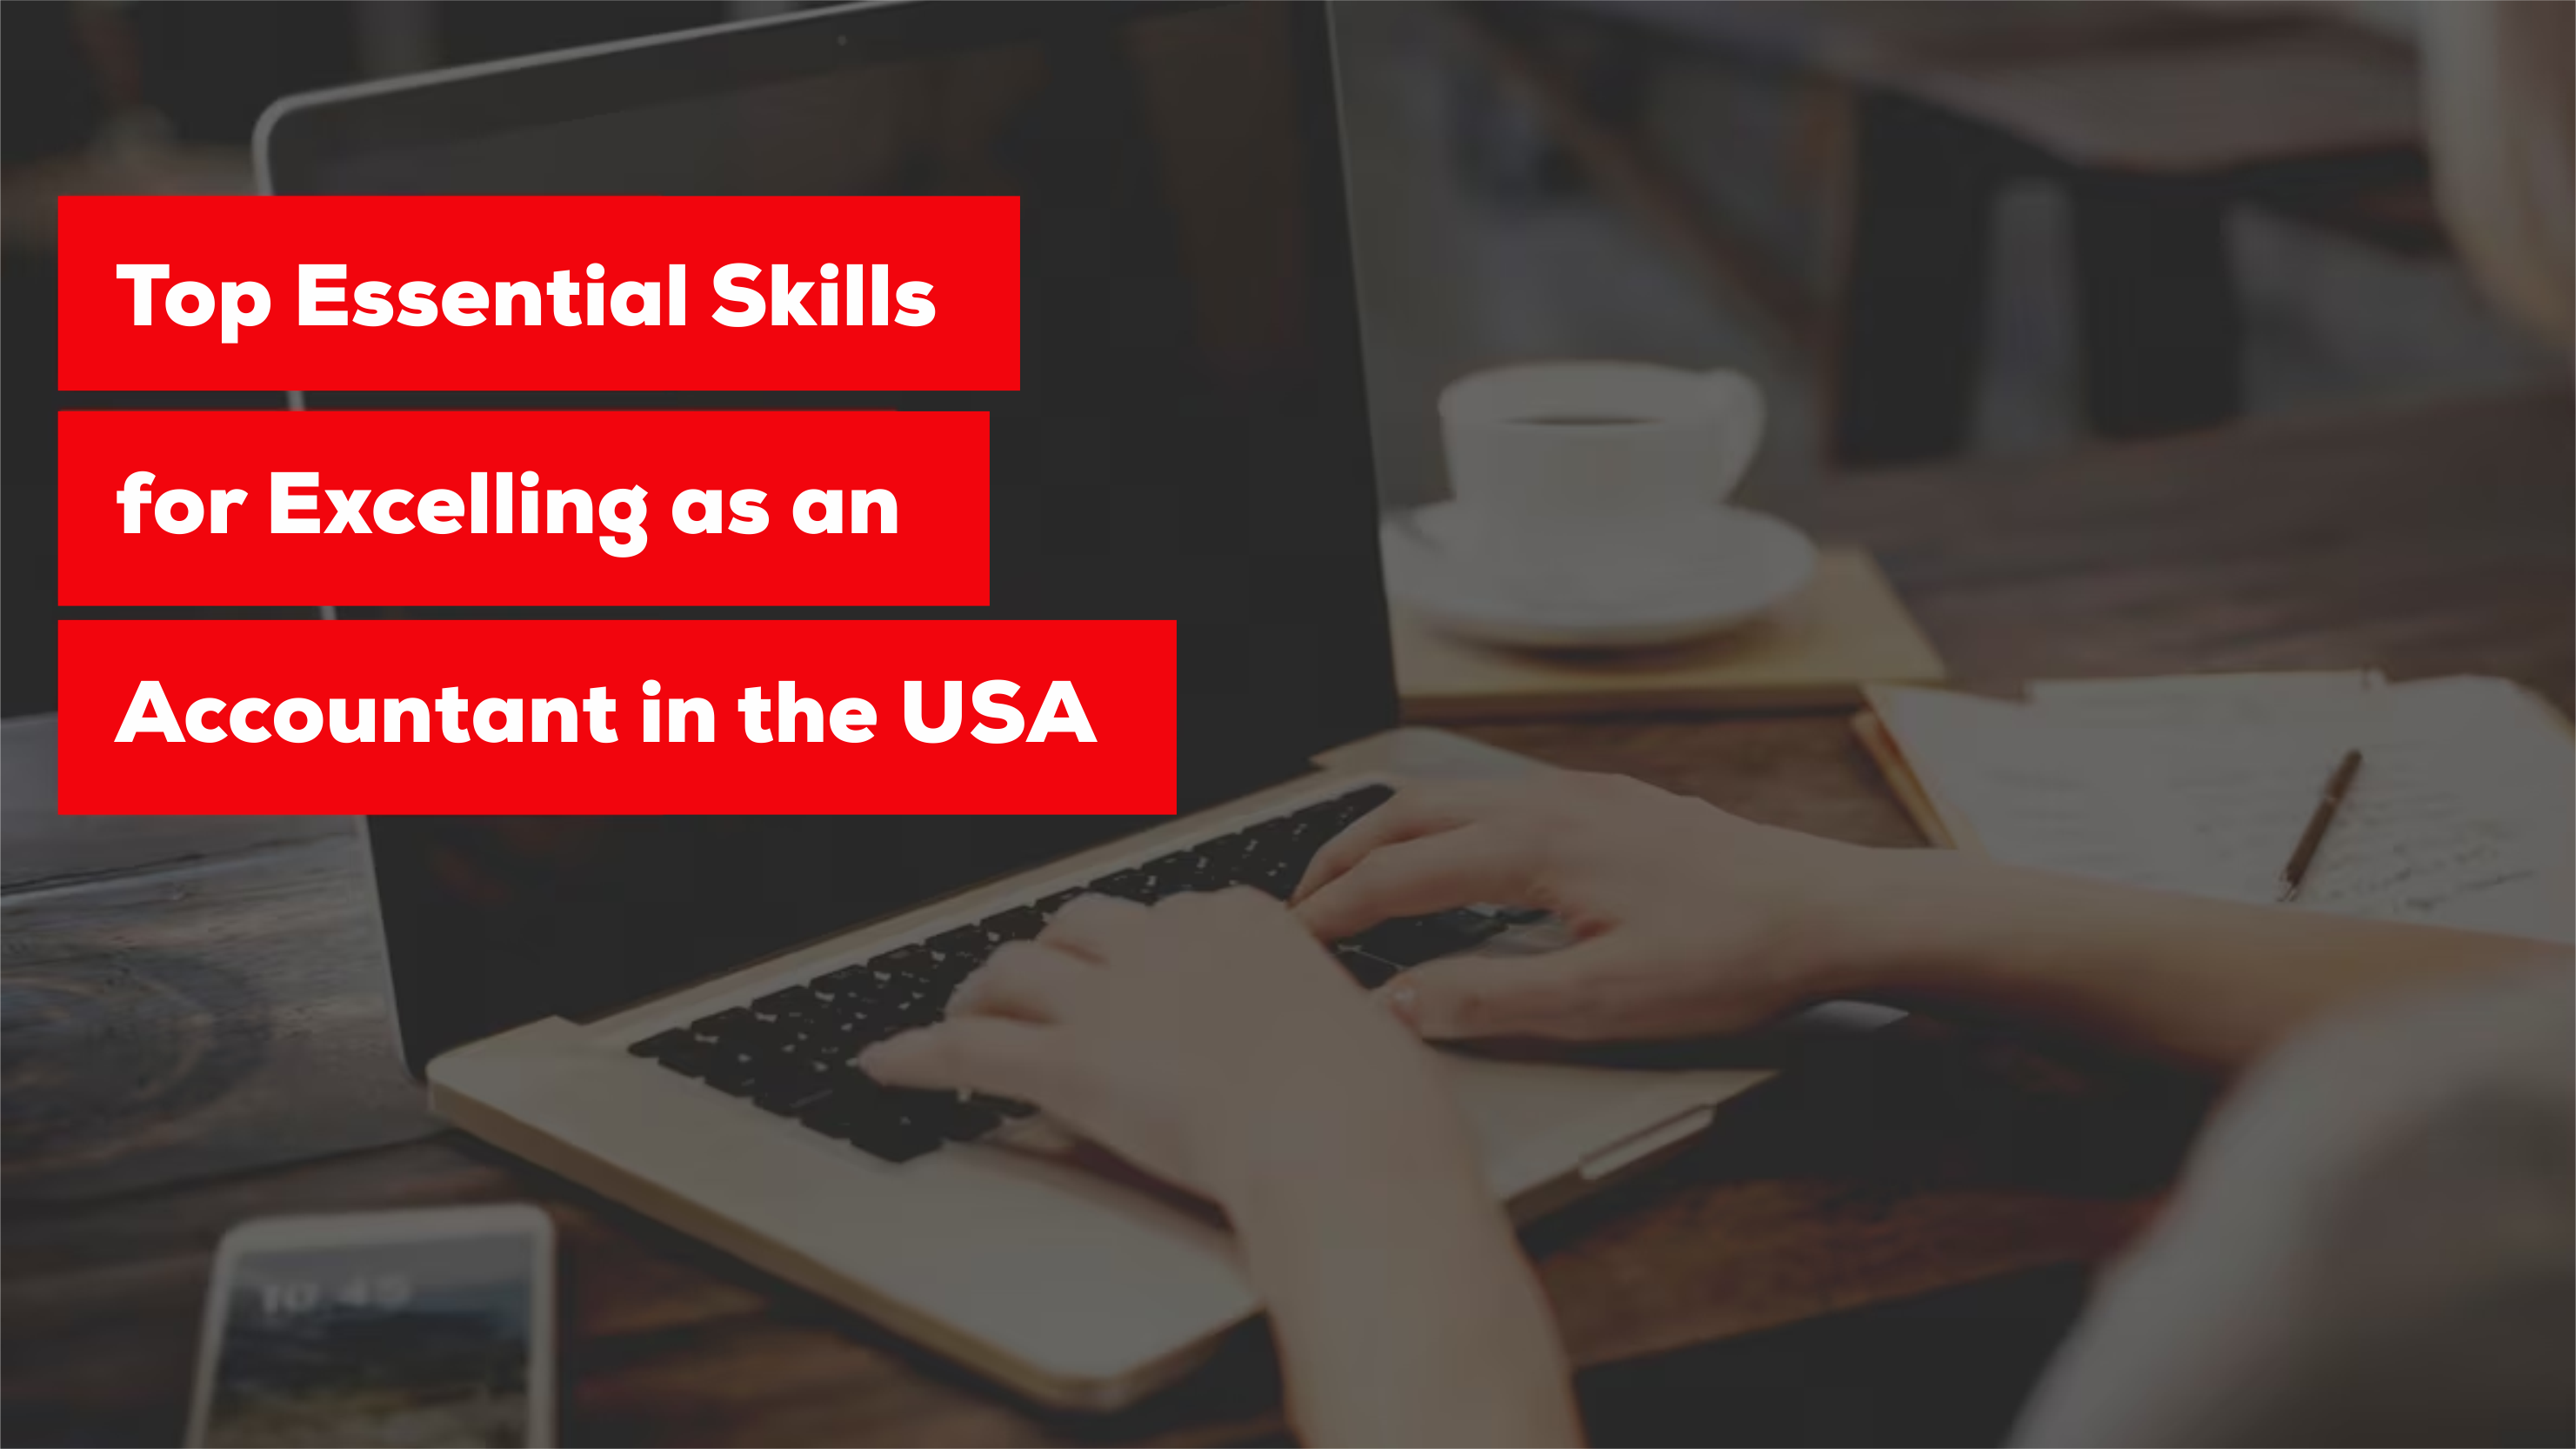 Top Essential Skills for Excelling as an Accountant in the USA (1)